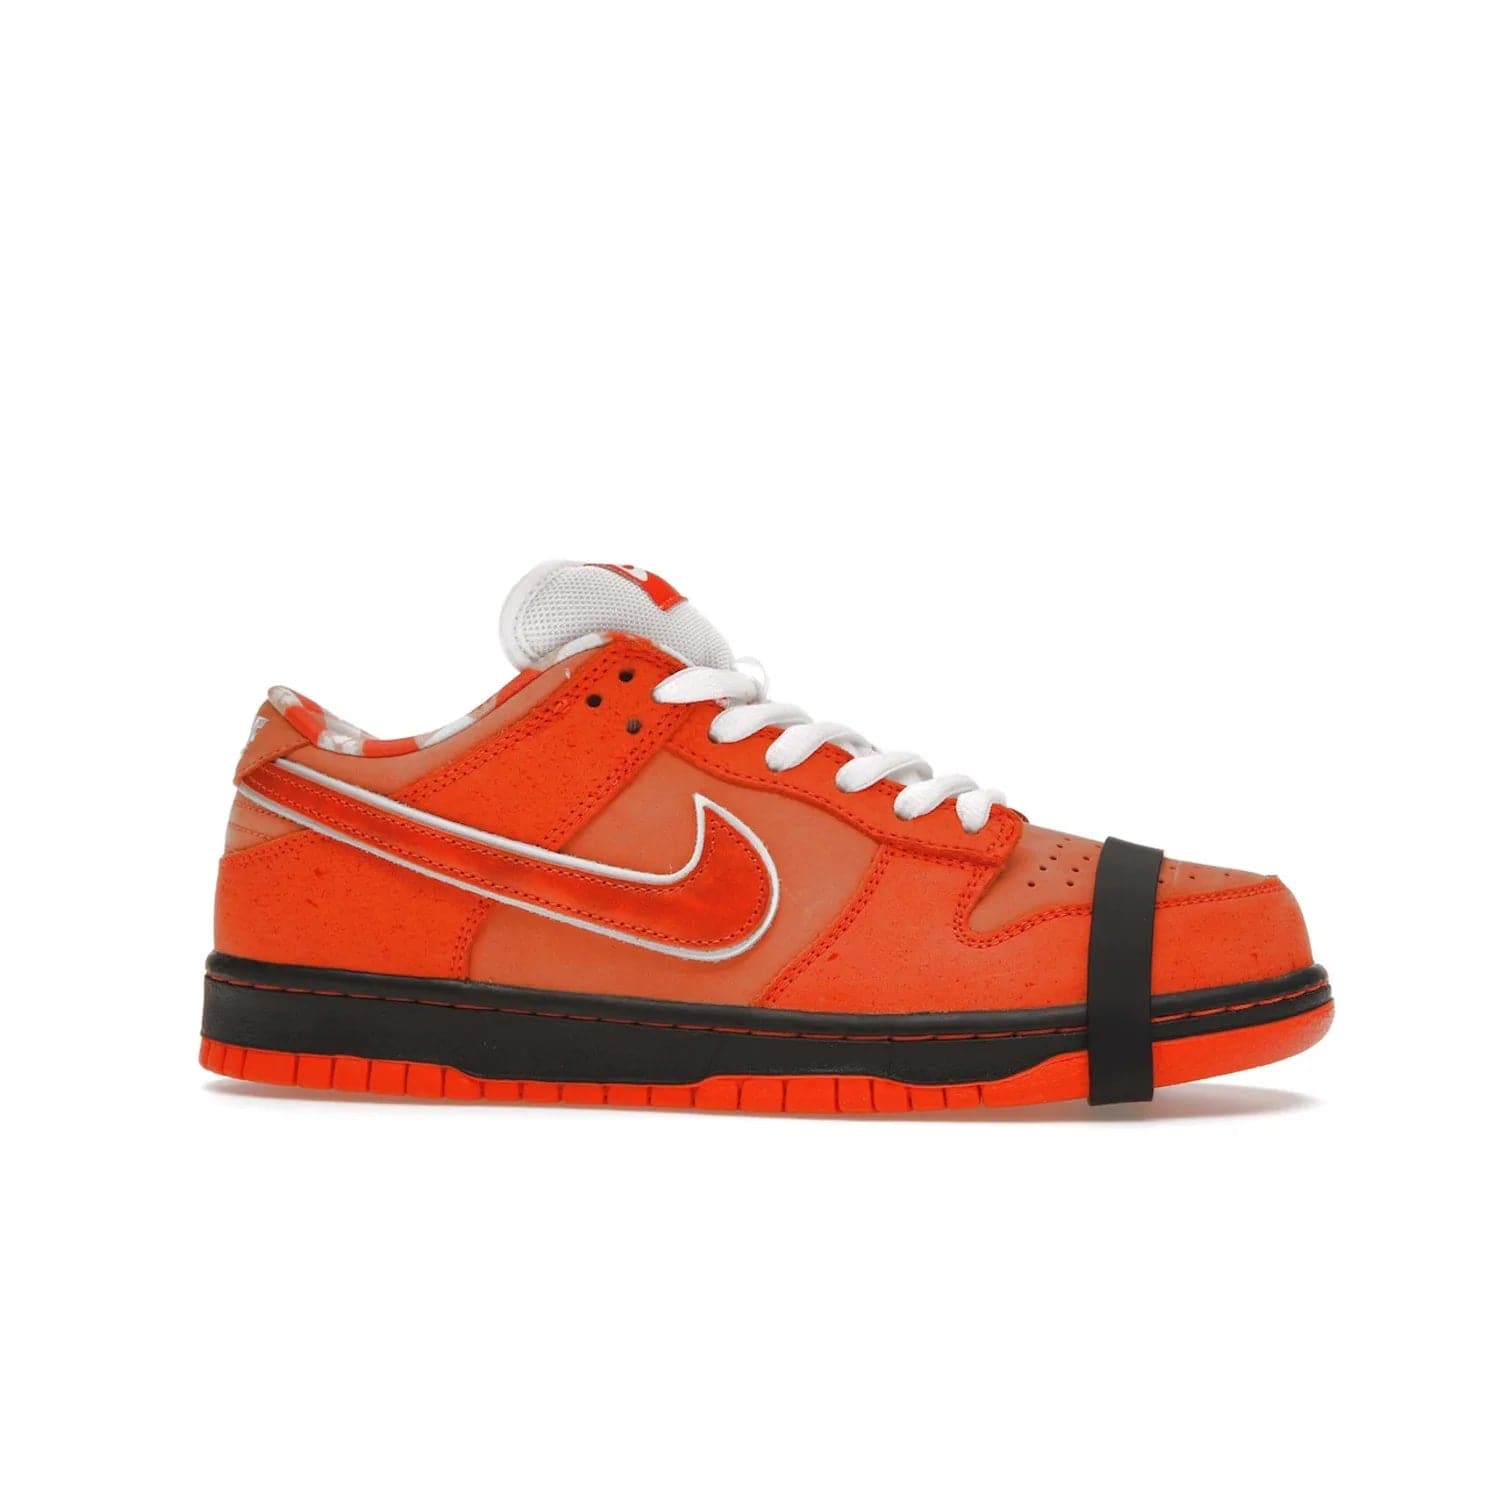 Nike SB Dunk Low Concepts Orange Lobster - Image 2 - Only at www.BallersClubKickz.com - Make a statement with the Nike SB Dunk Low Concepts Orange Lobster. Variety of orange hues, nubuck upper, bib-inspired lining & rubber outsole create bold look & comfortable blend of style. Available December 20th, 2022.